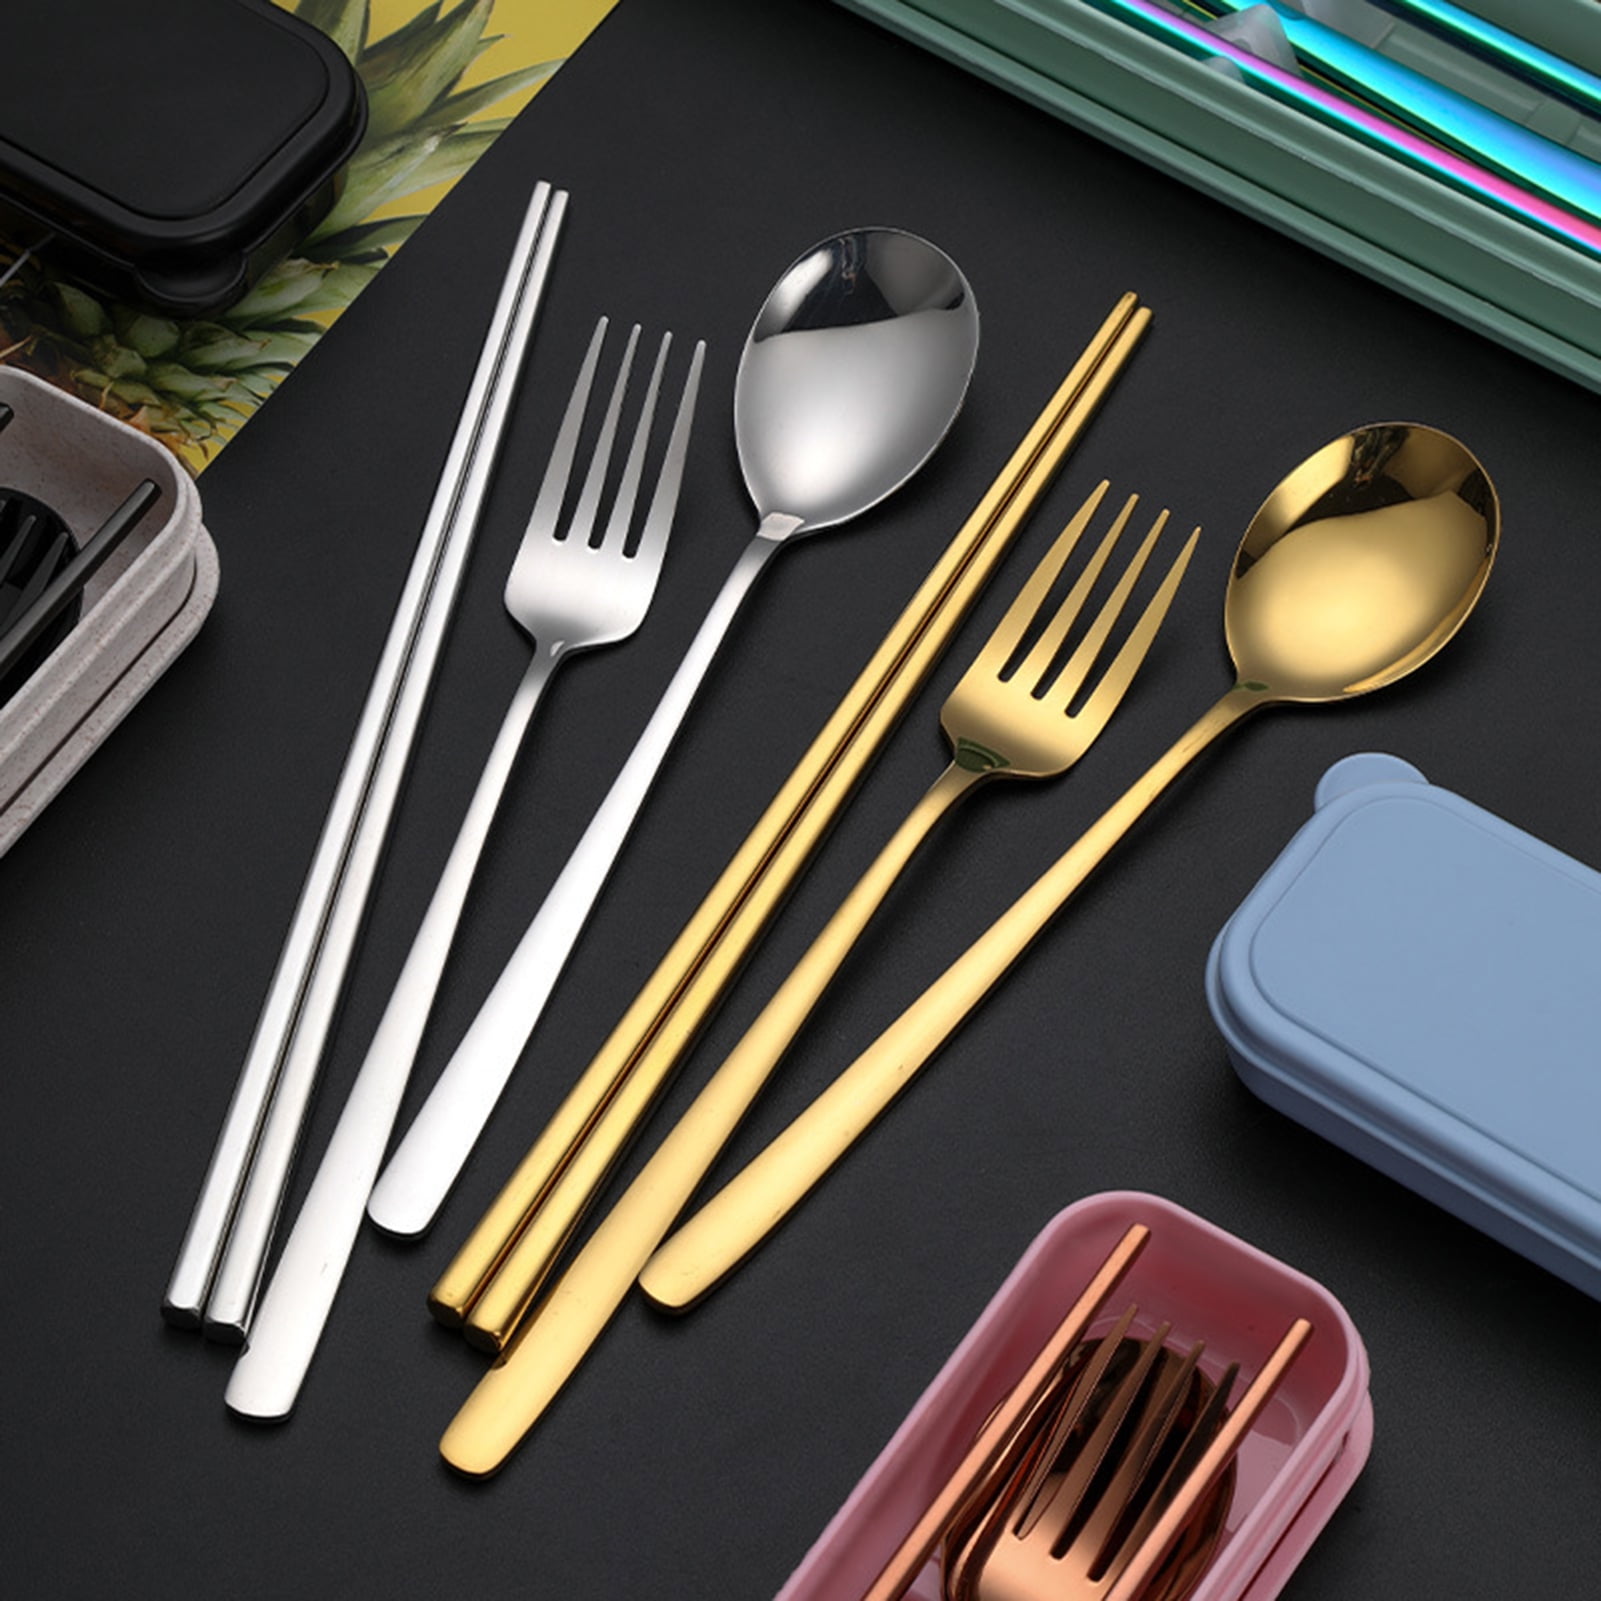 Travel Cutlery with Chopsticks & Straw - Whisk